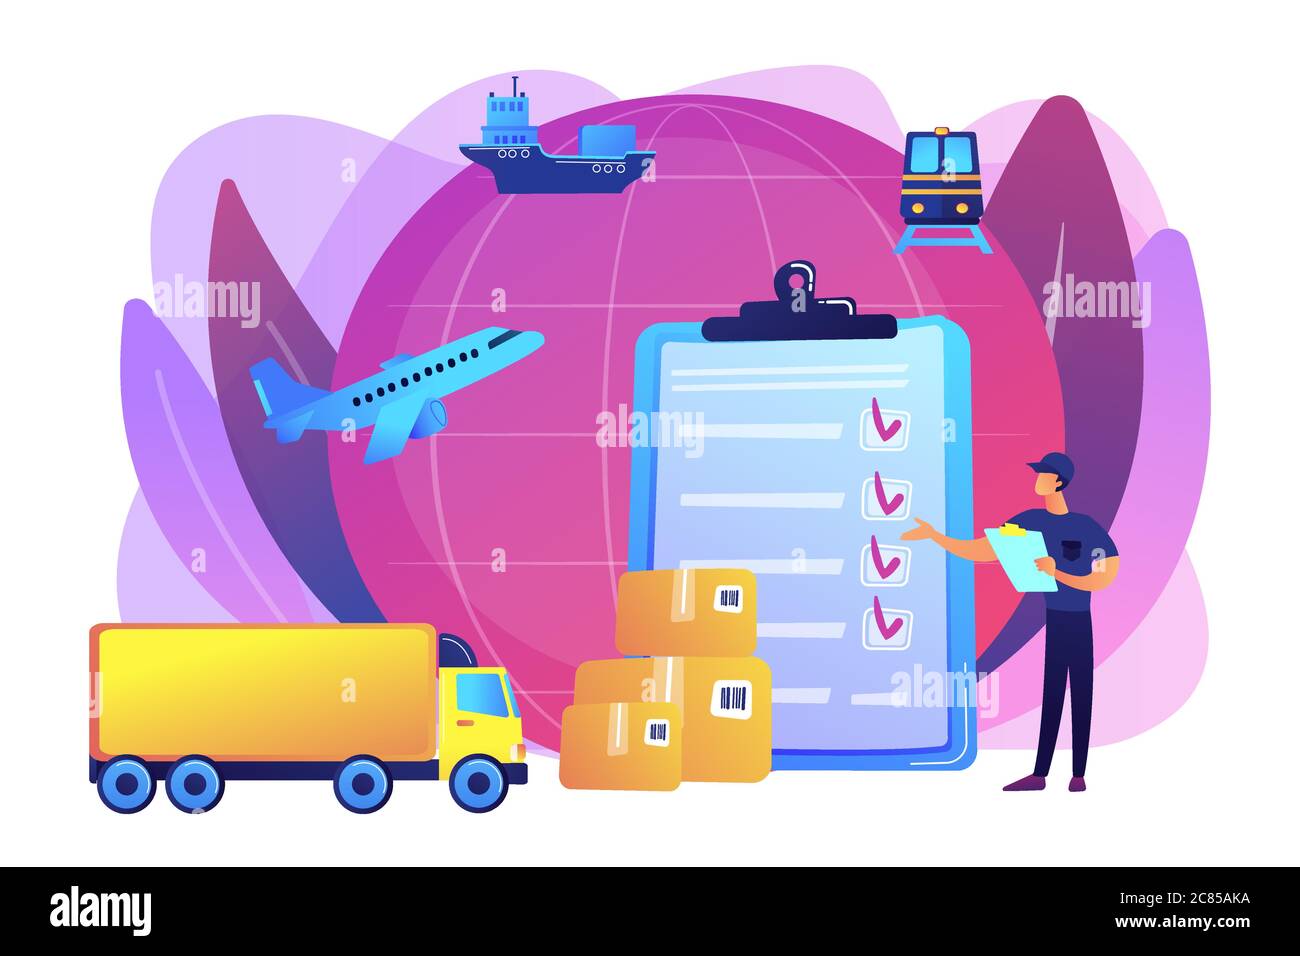 Customs clearance concept vector illustration Stock Vector